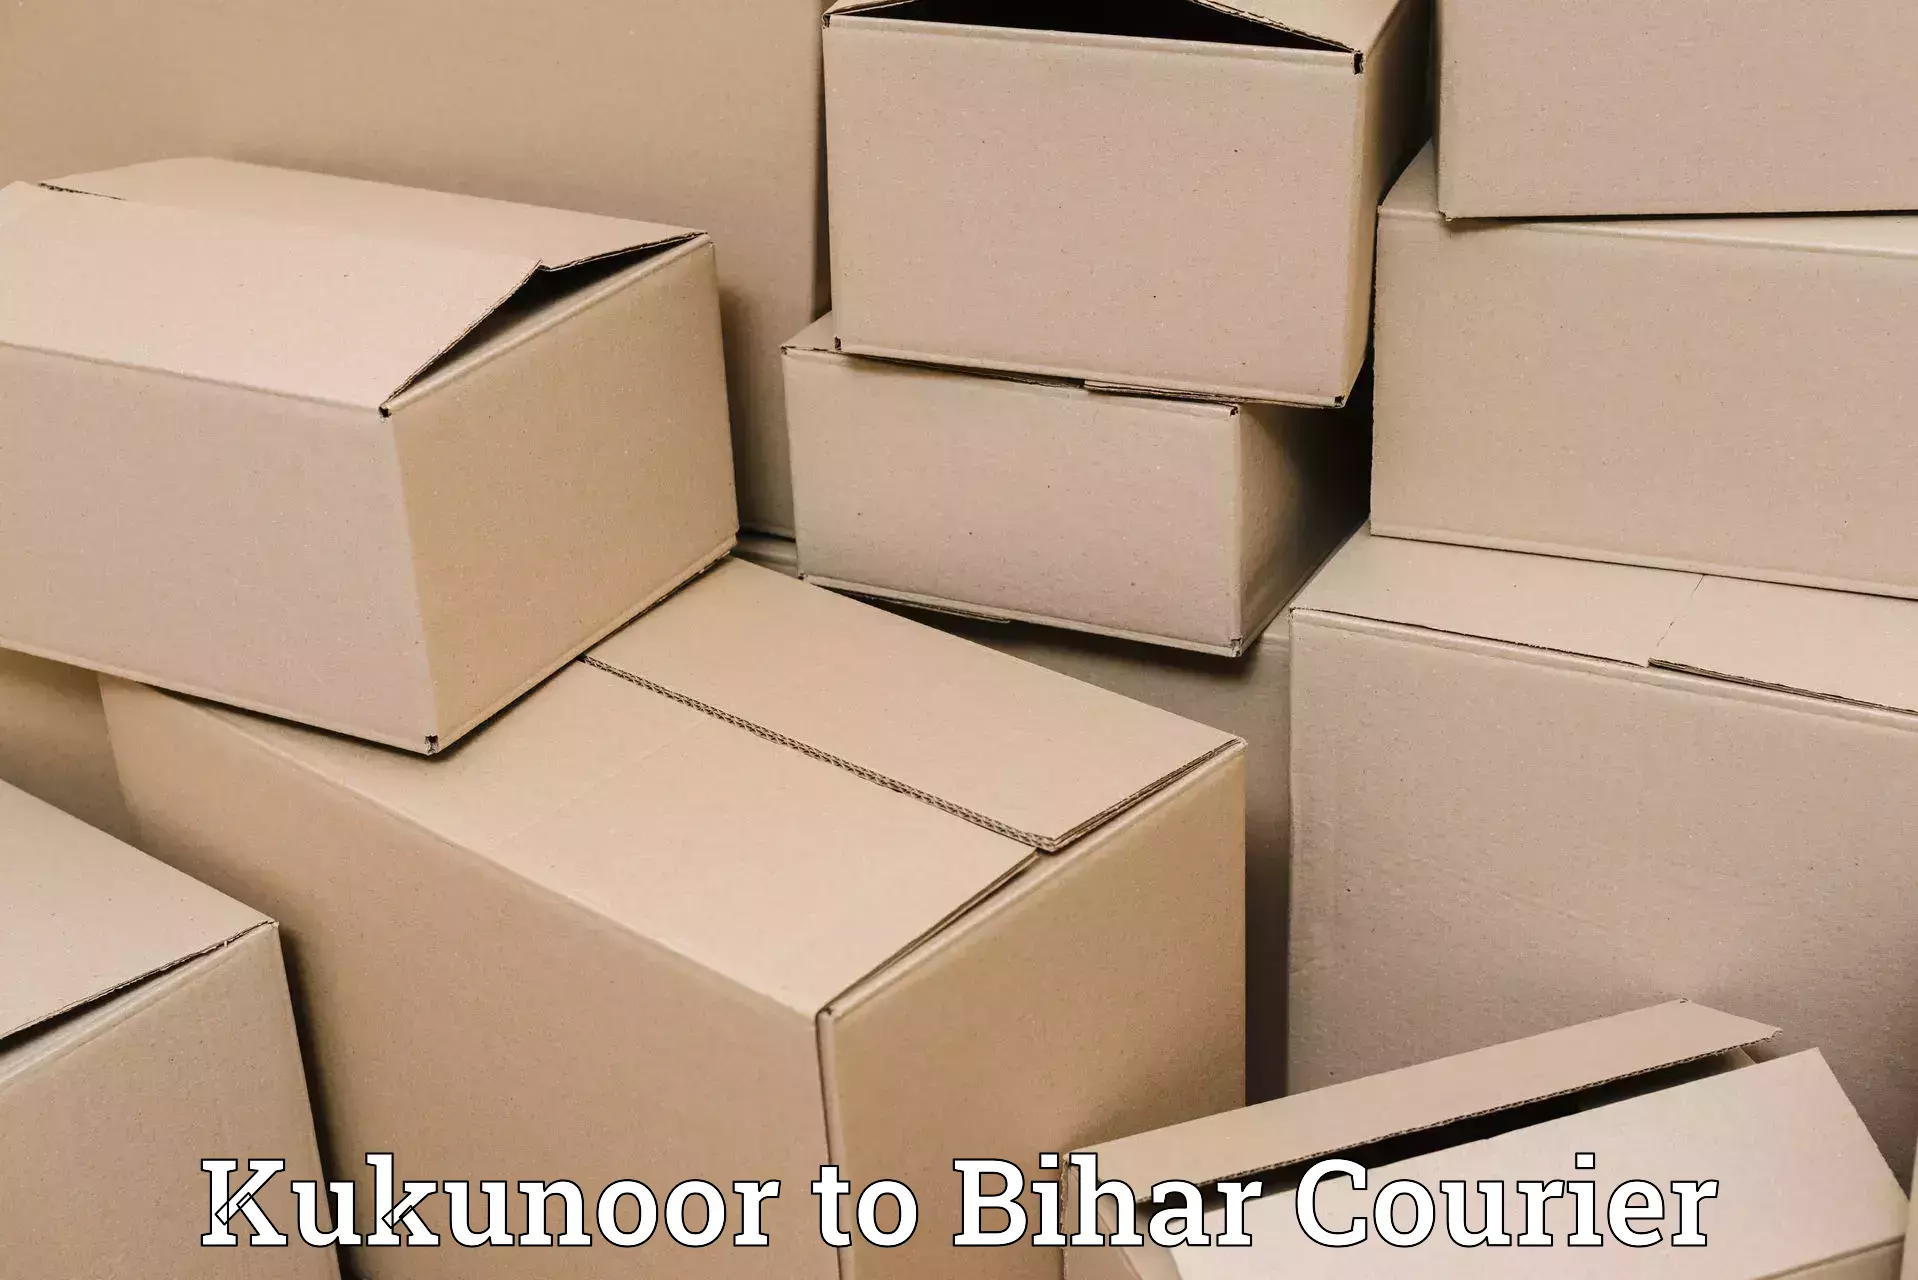 End-to-end delivery Kukunoor to Bihar